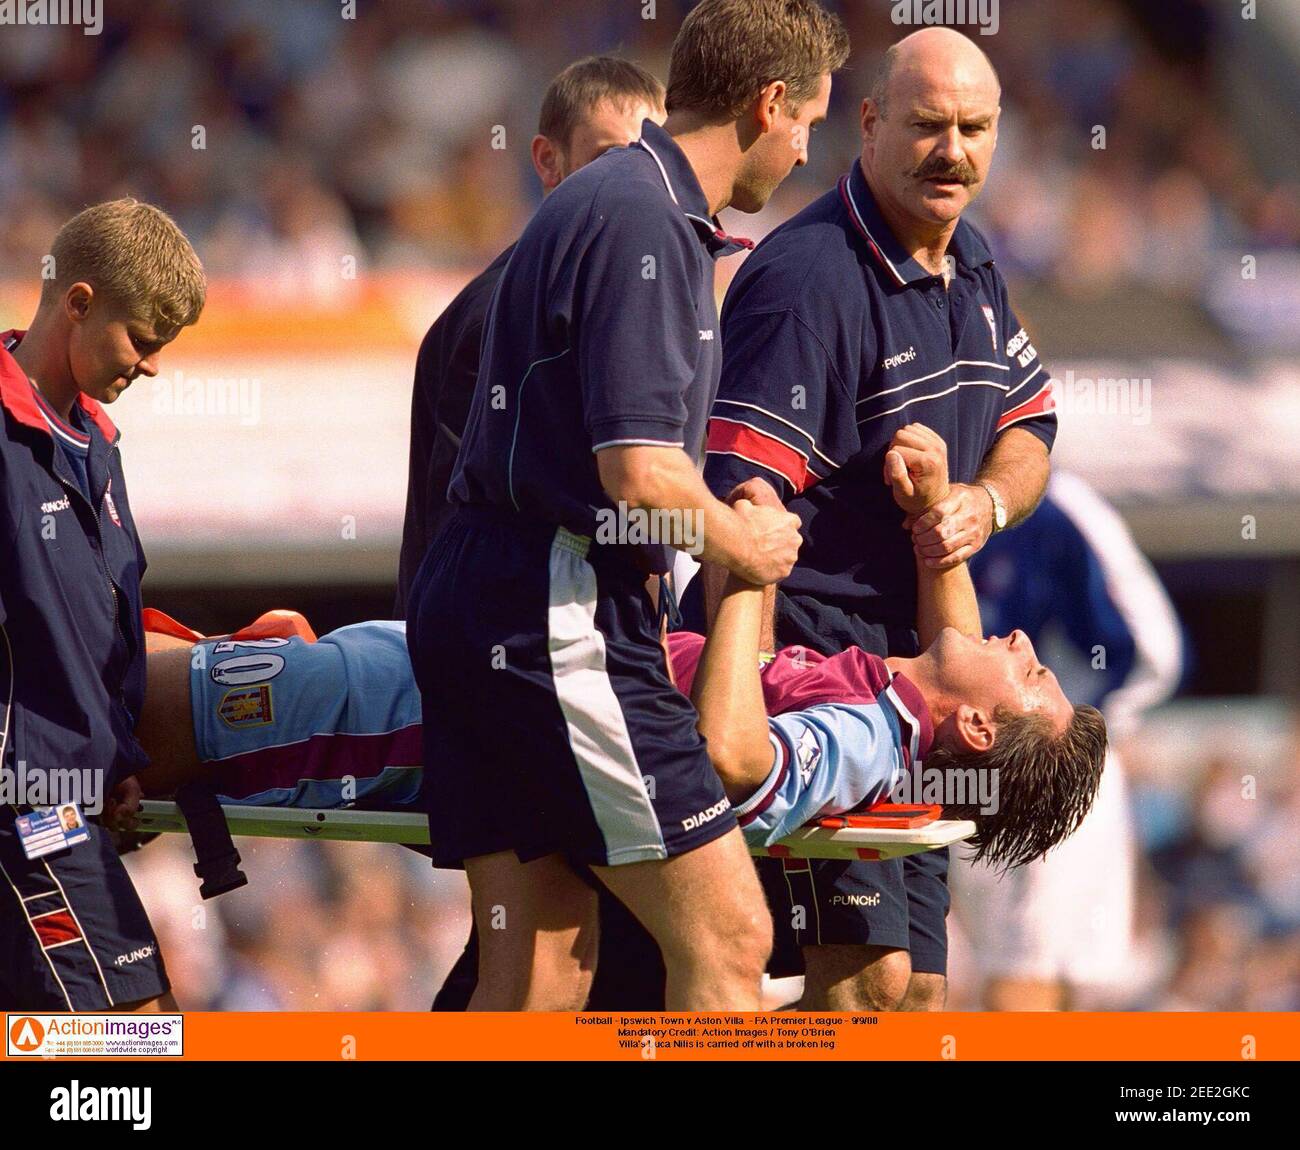 Football - Ipswich Town v Aston Villa - FA Premier League - 9/9/00  Mandatory Credit: Action Images / Tony O'Brien Villa's Luc Nilis is carried  off with a broken leg Stock Photo - Alamy